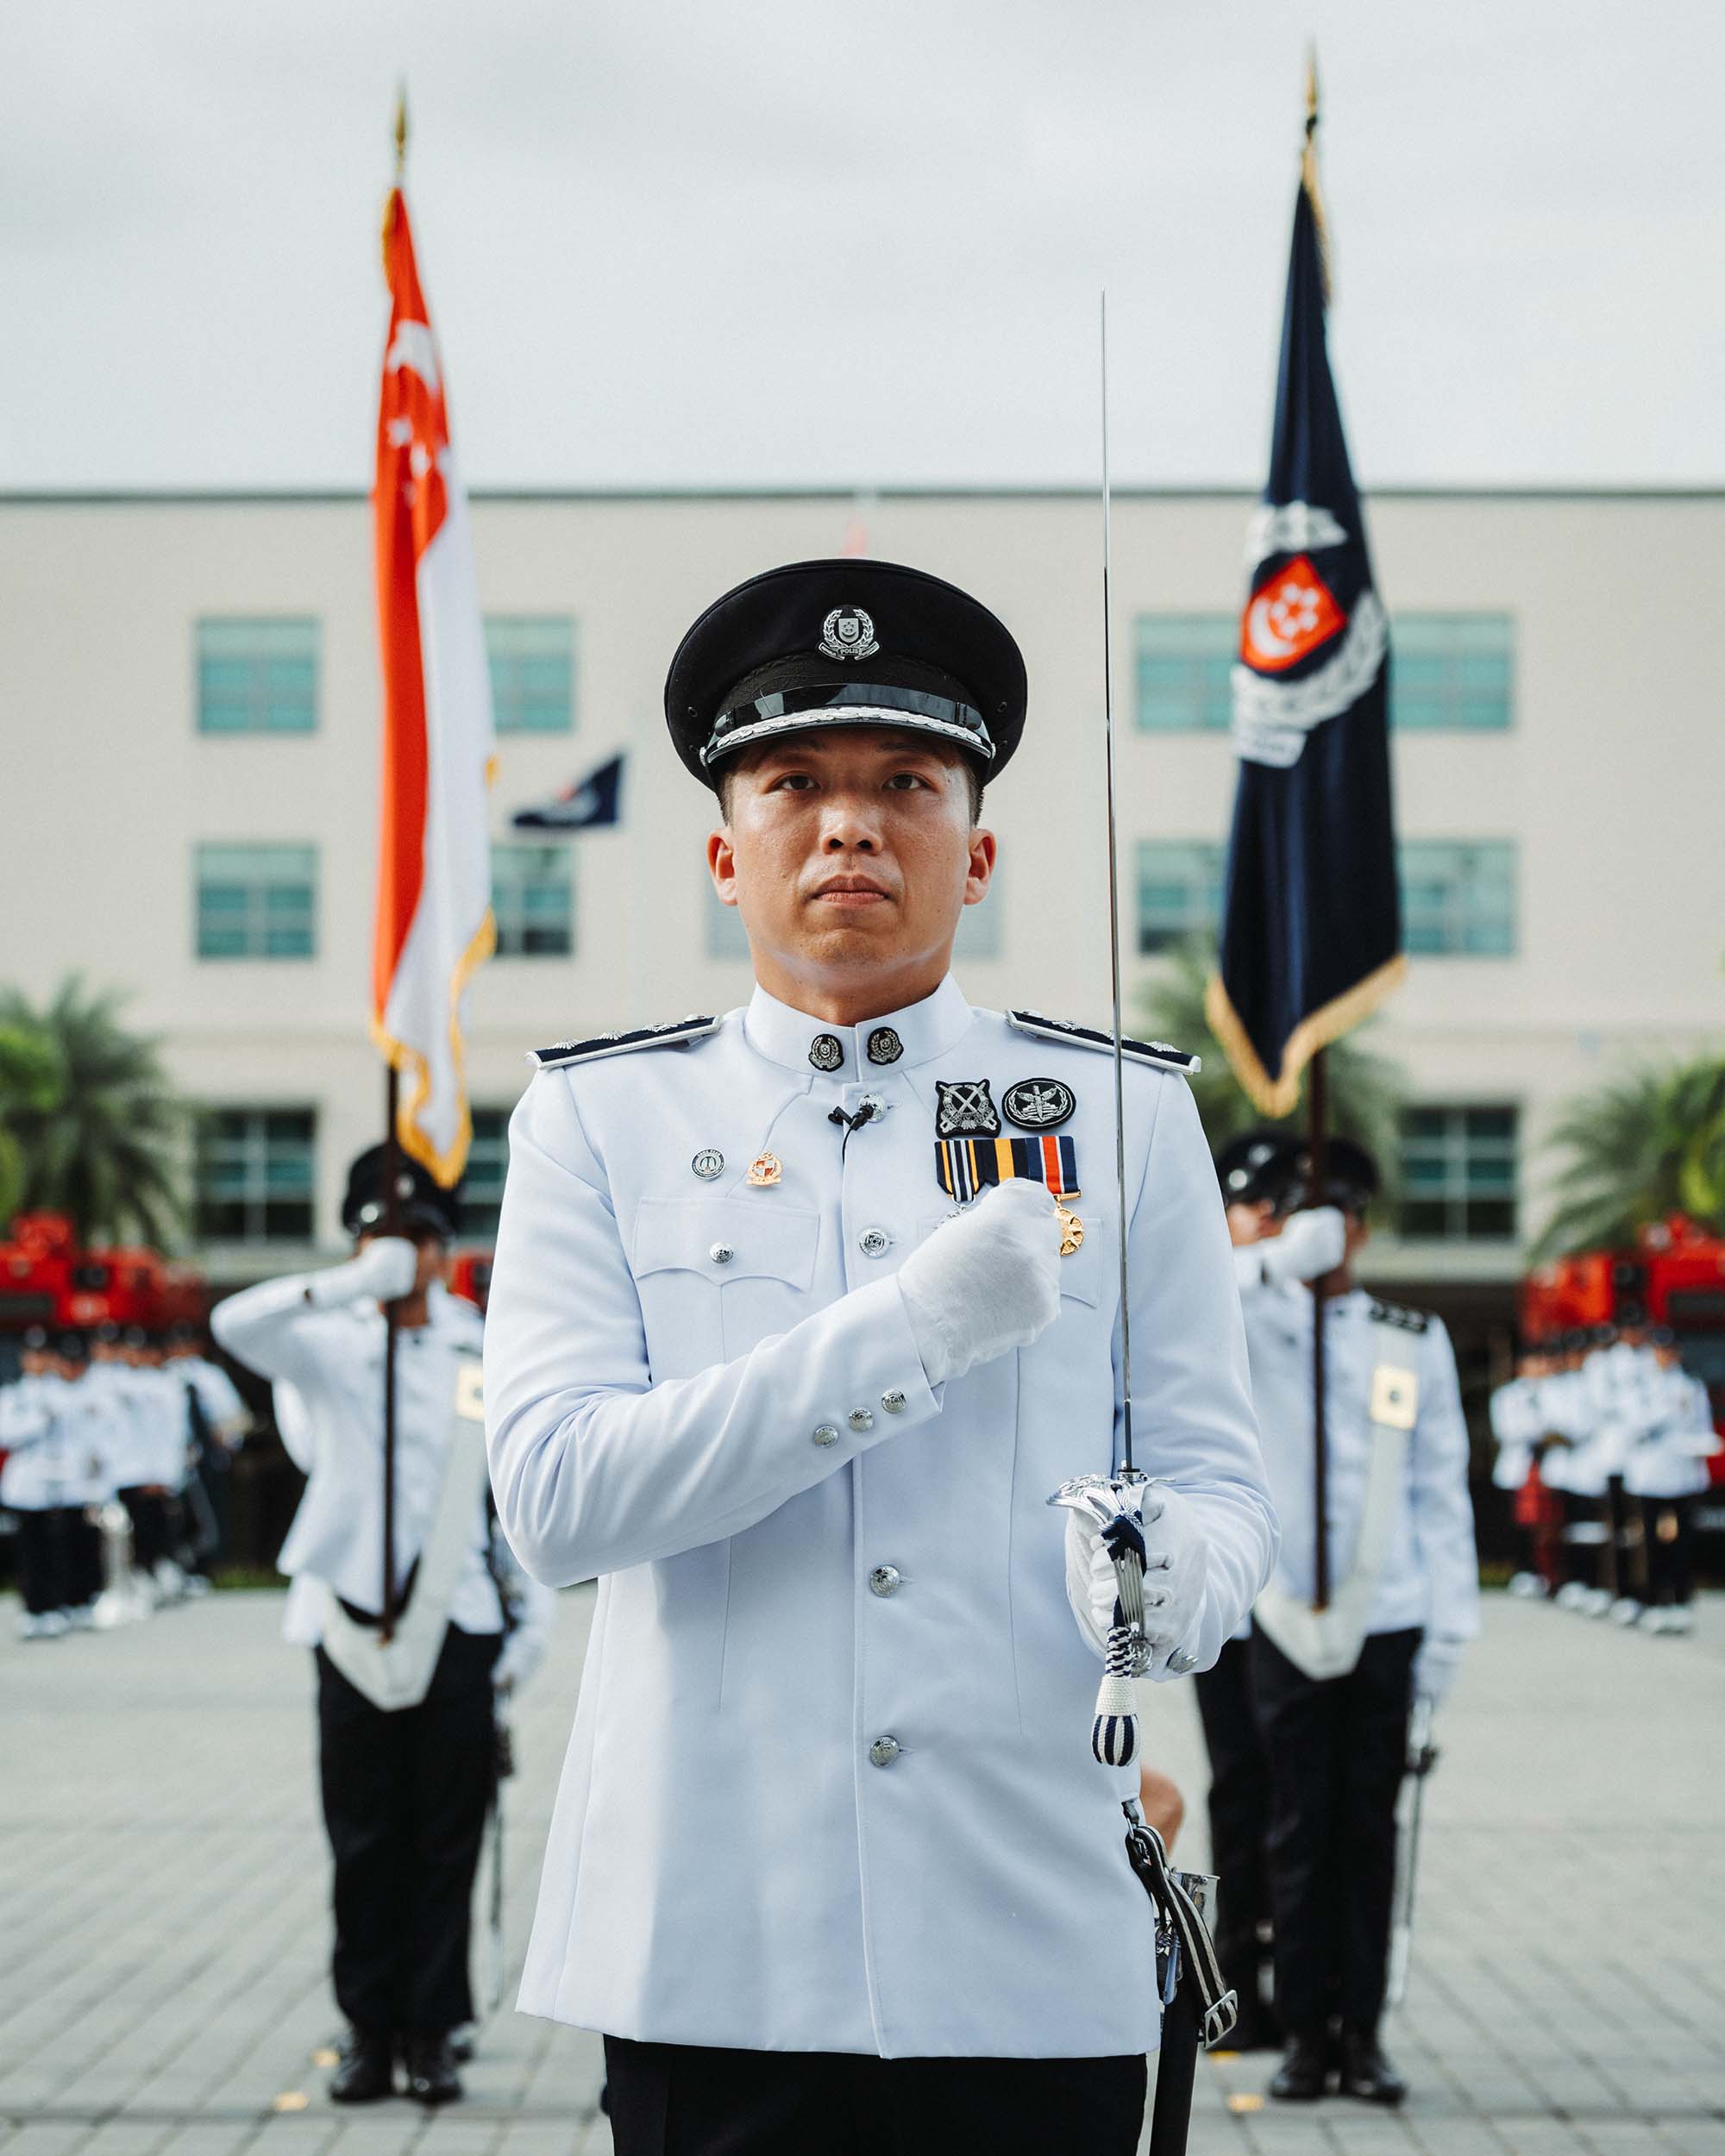 For Supt Koh Chao Rong, it’s an honour to serve as the Parade Commander and march with pride, purpose and unity with his fellow officers. PHOTOS: Naveen Raj